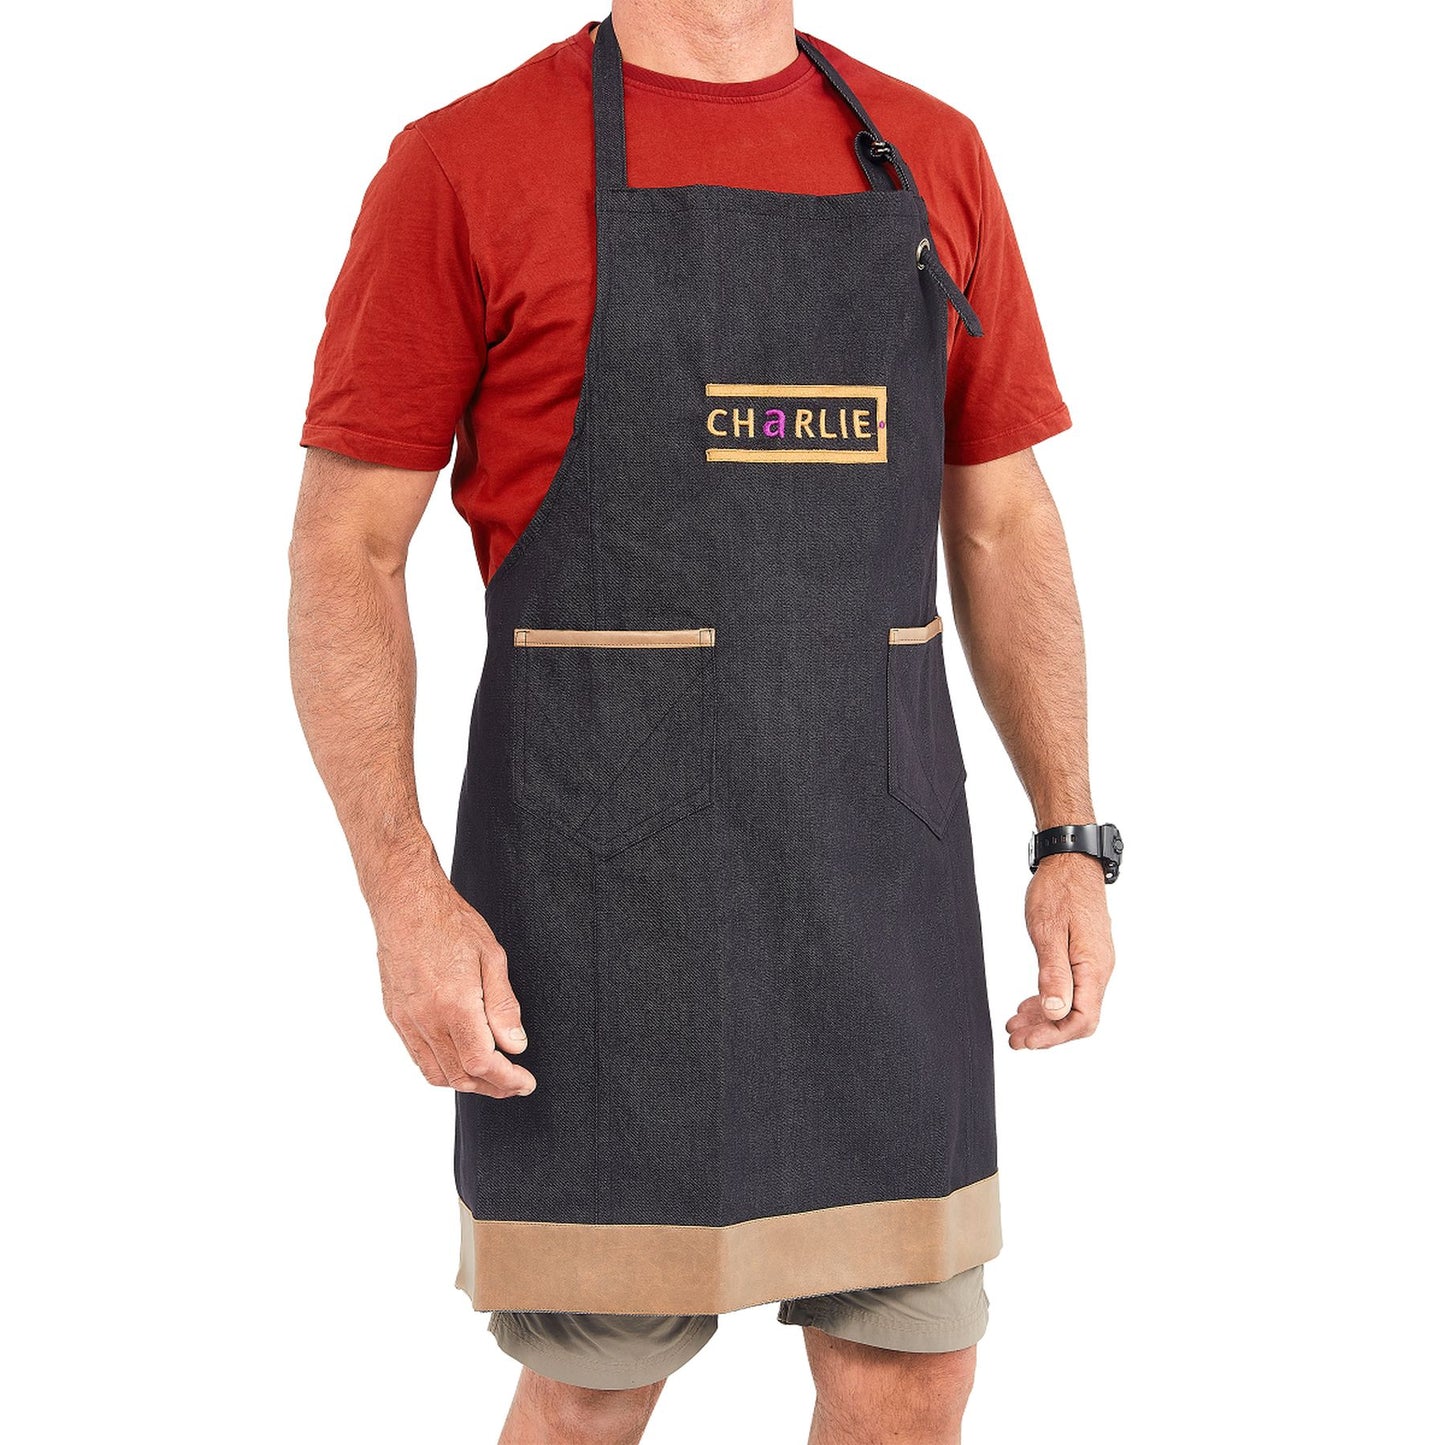 Charlie Oven - Apron